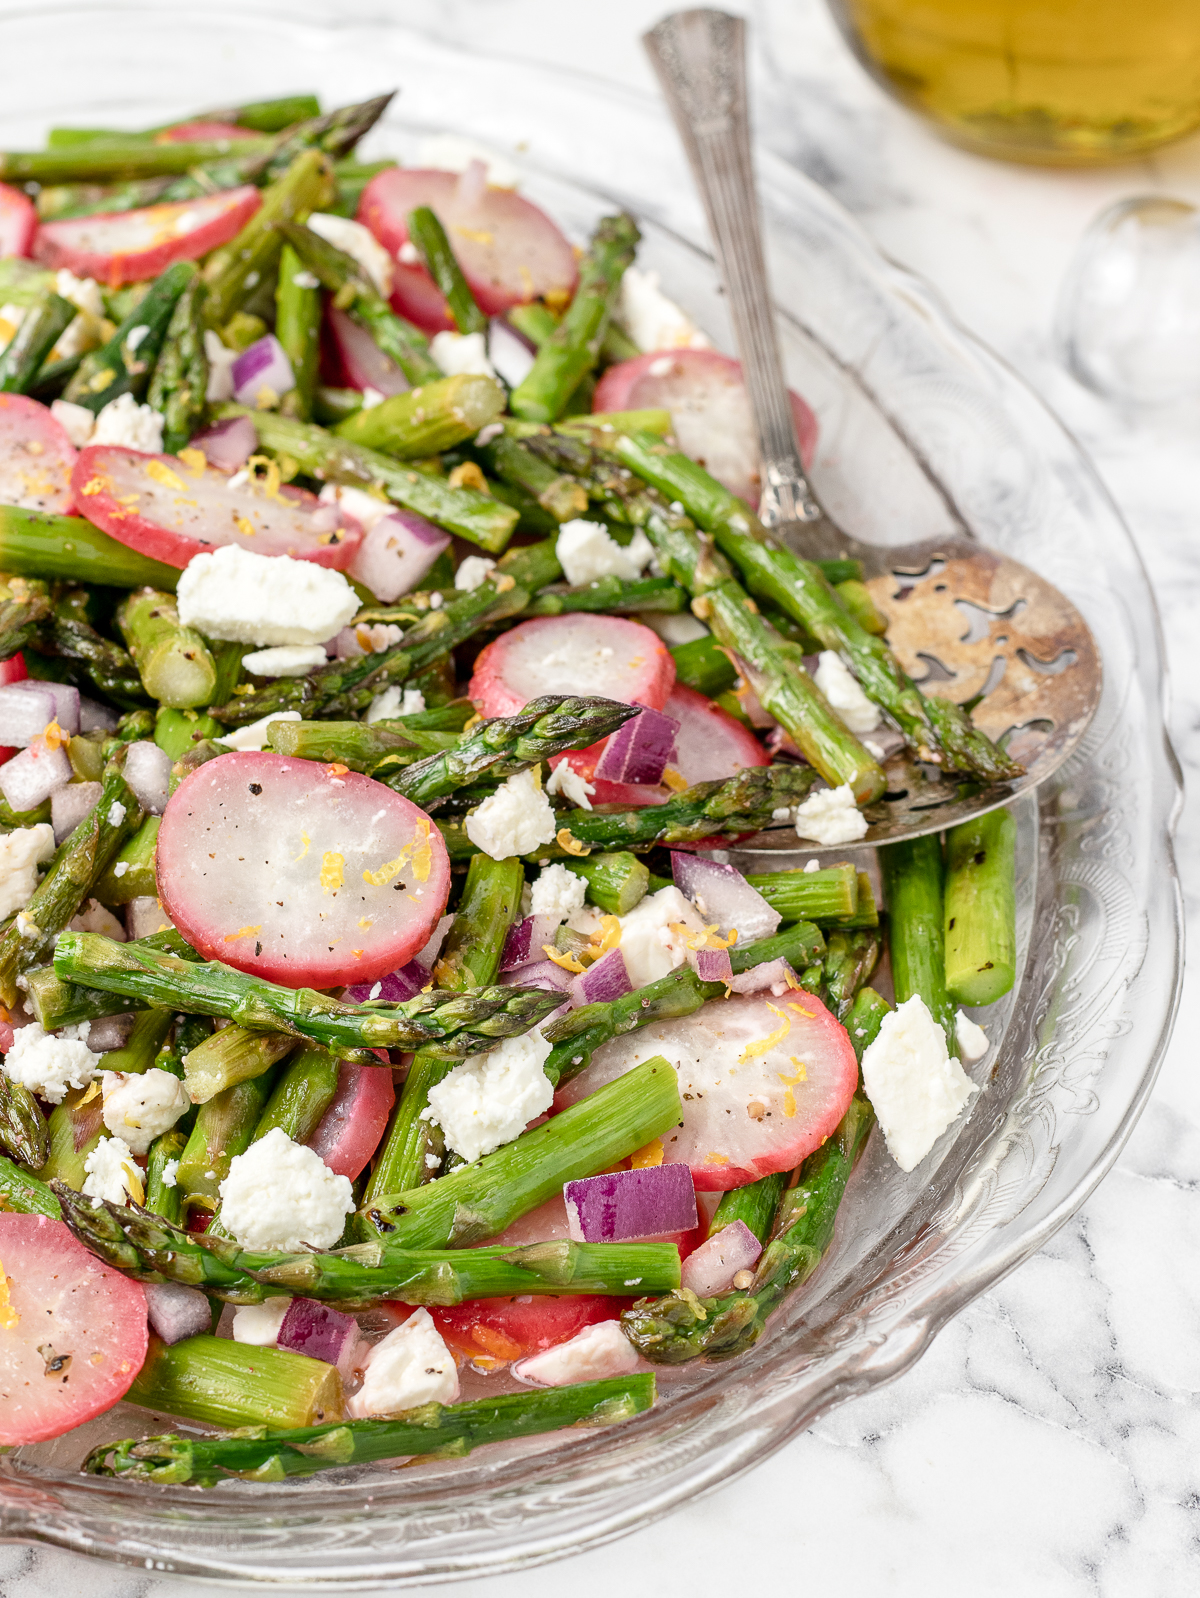 Roasted Asparagus Salad with radishes, feta cheese, and red onion and a big serving spoon for scooping.